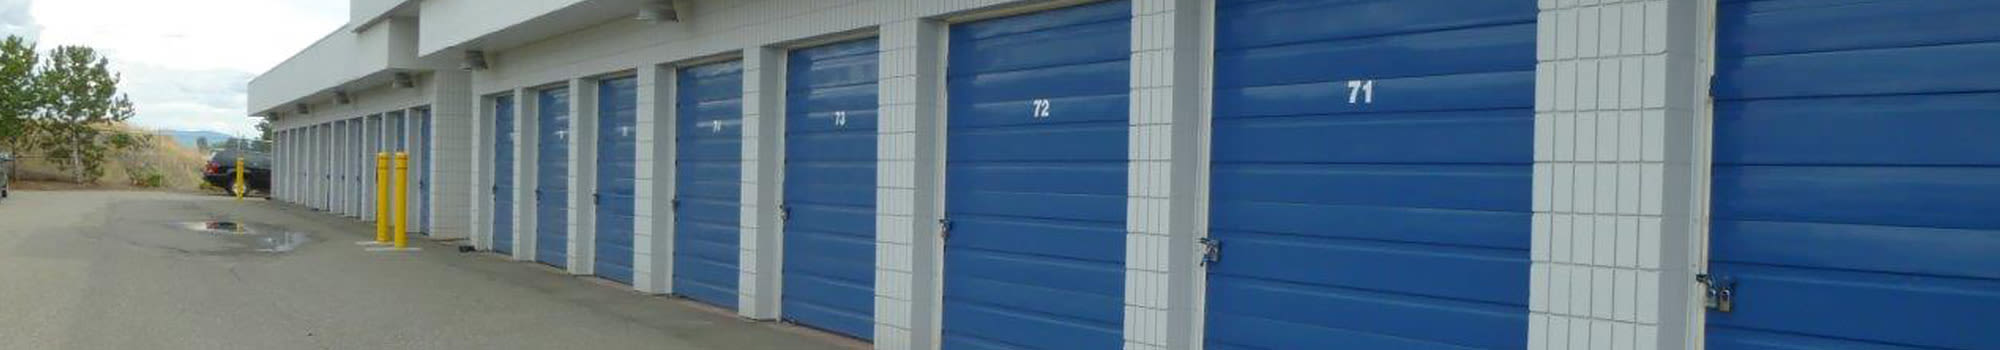 Hours & Directions for Budget Self Storage in Kamloops, British Columbia